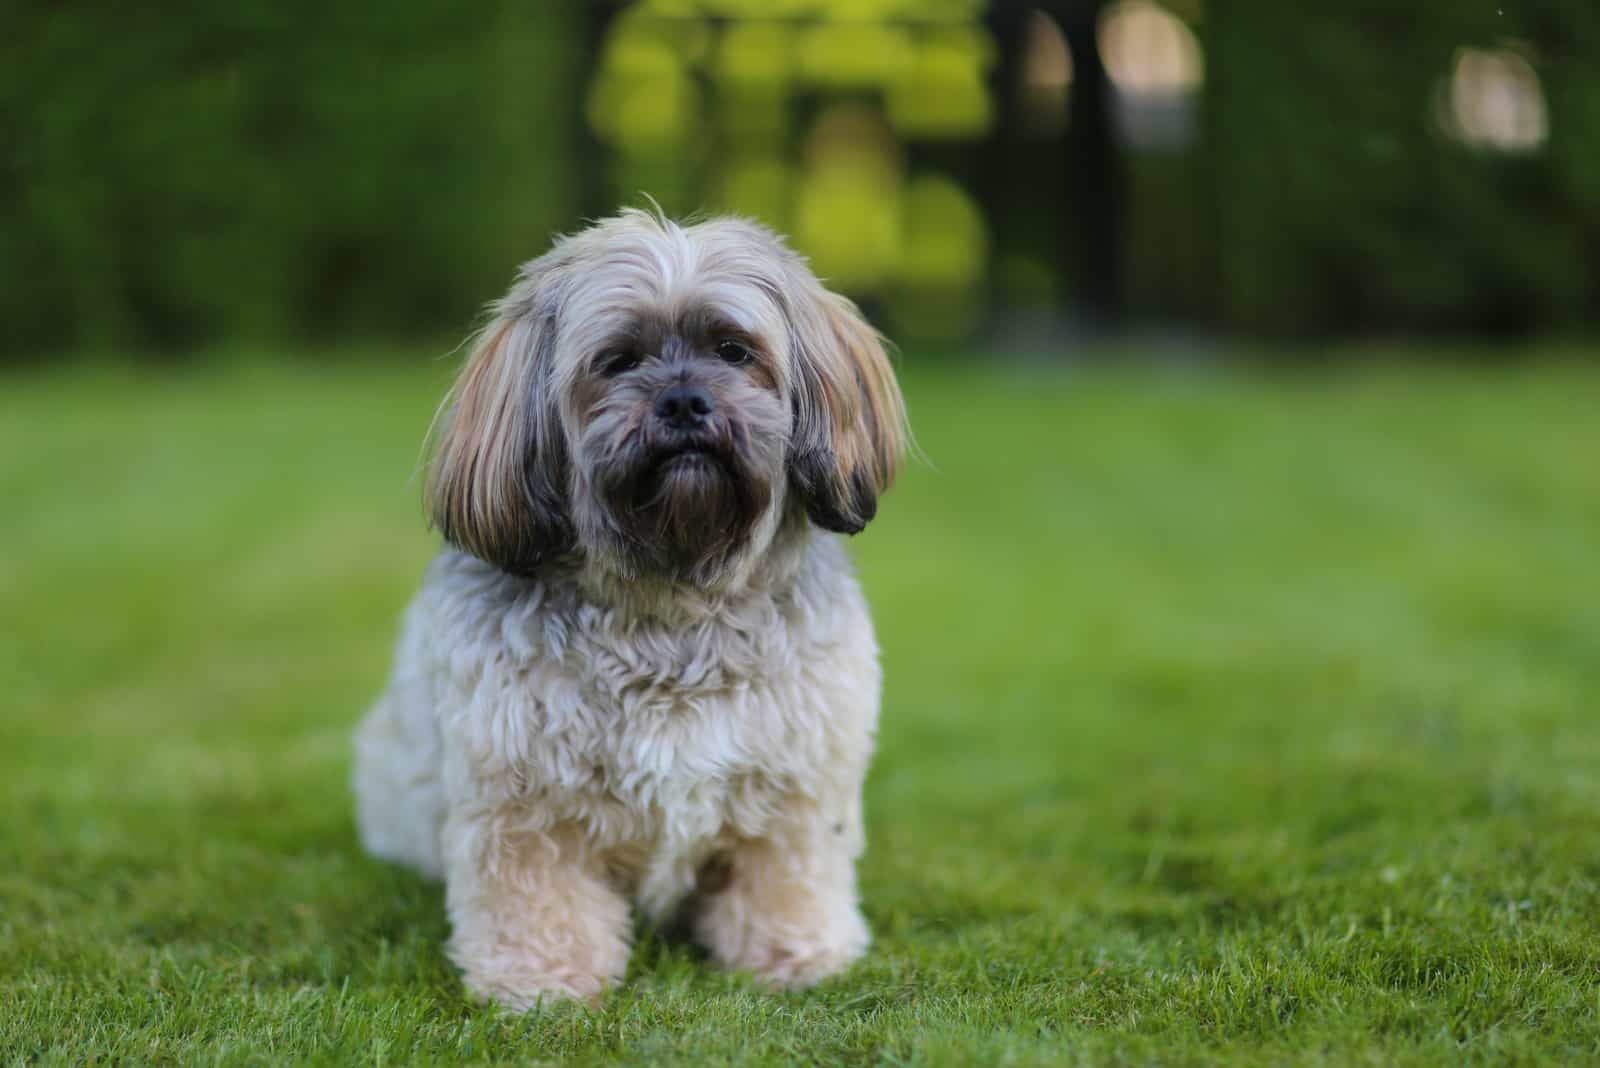 Lhasa Apso standing on grass